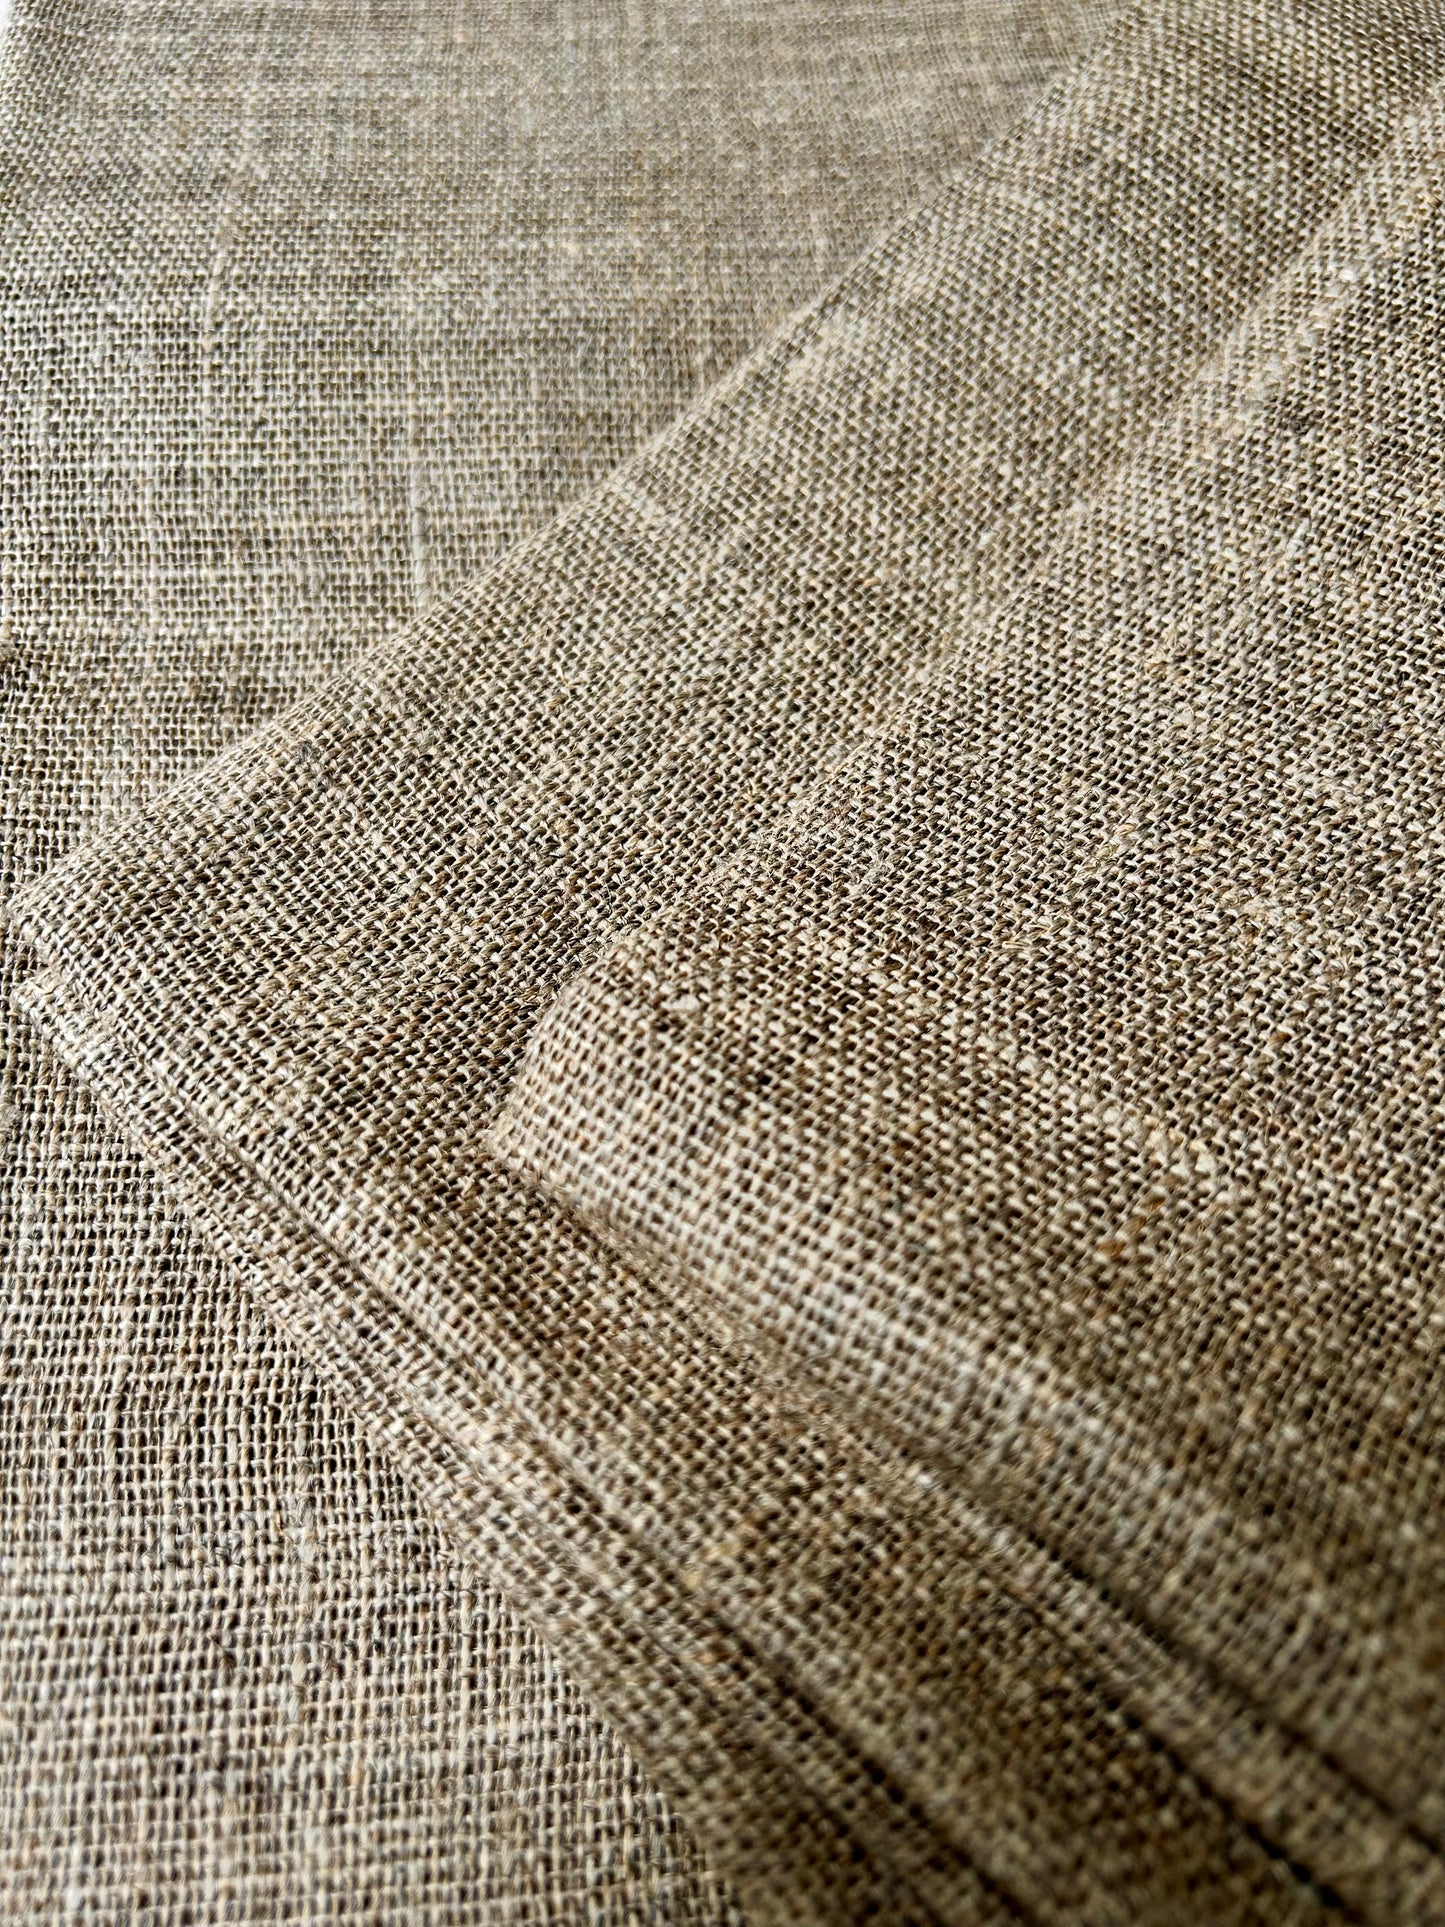 Brittany - Plain Weave